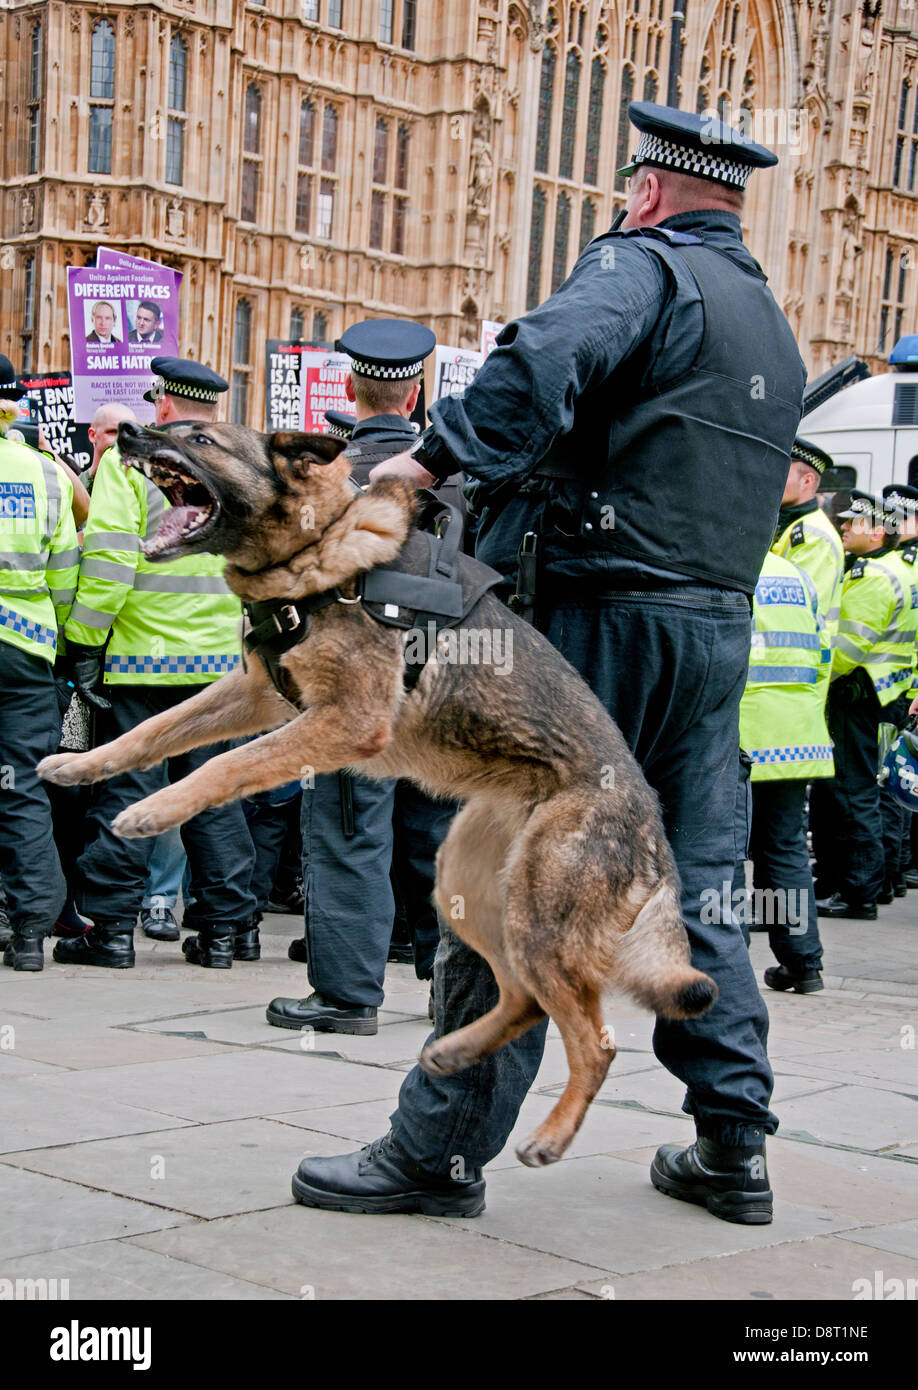 Alsatian Police dog on patrol ready to attack at protest Stock Photo